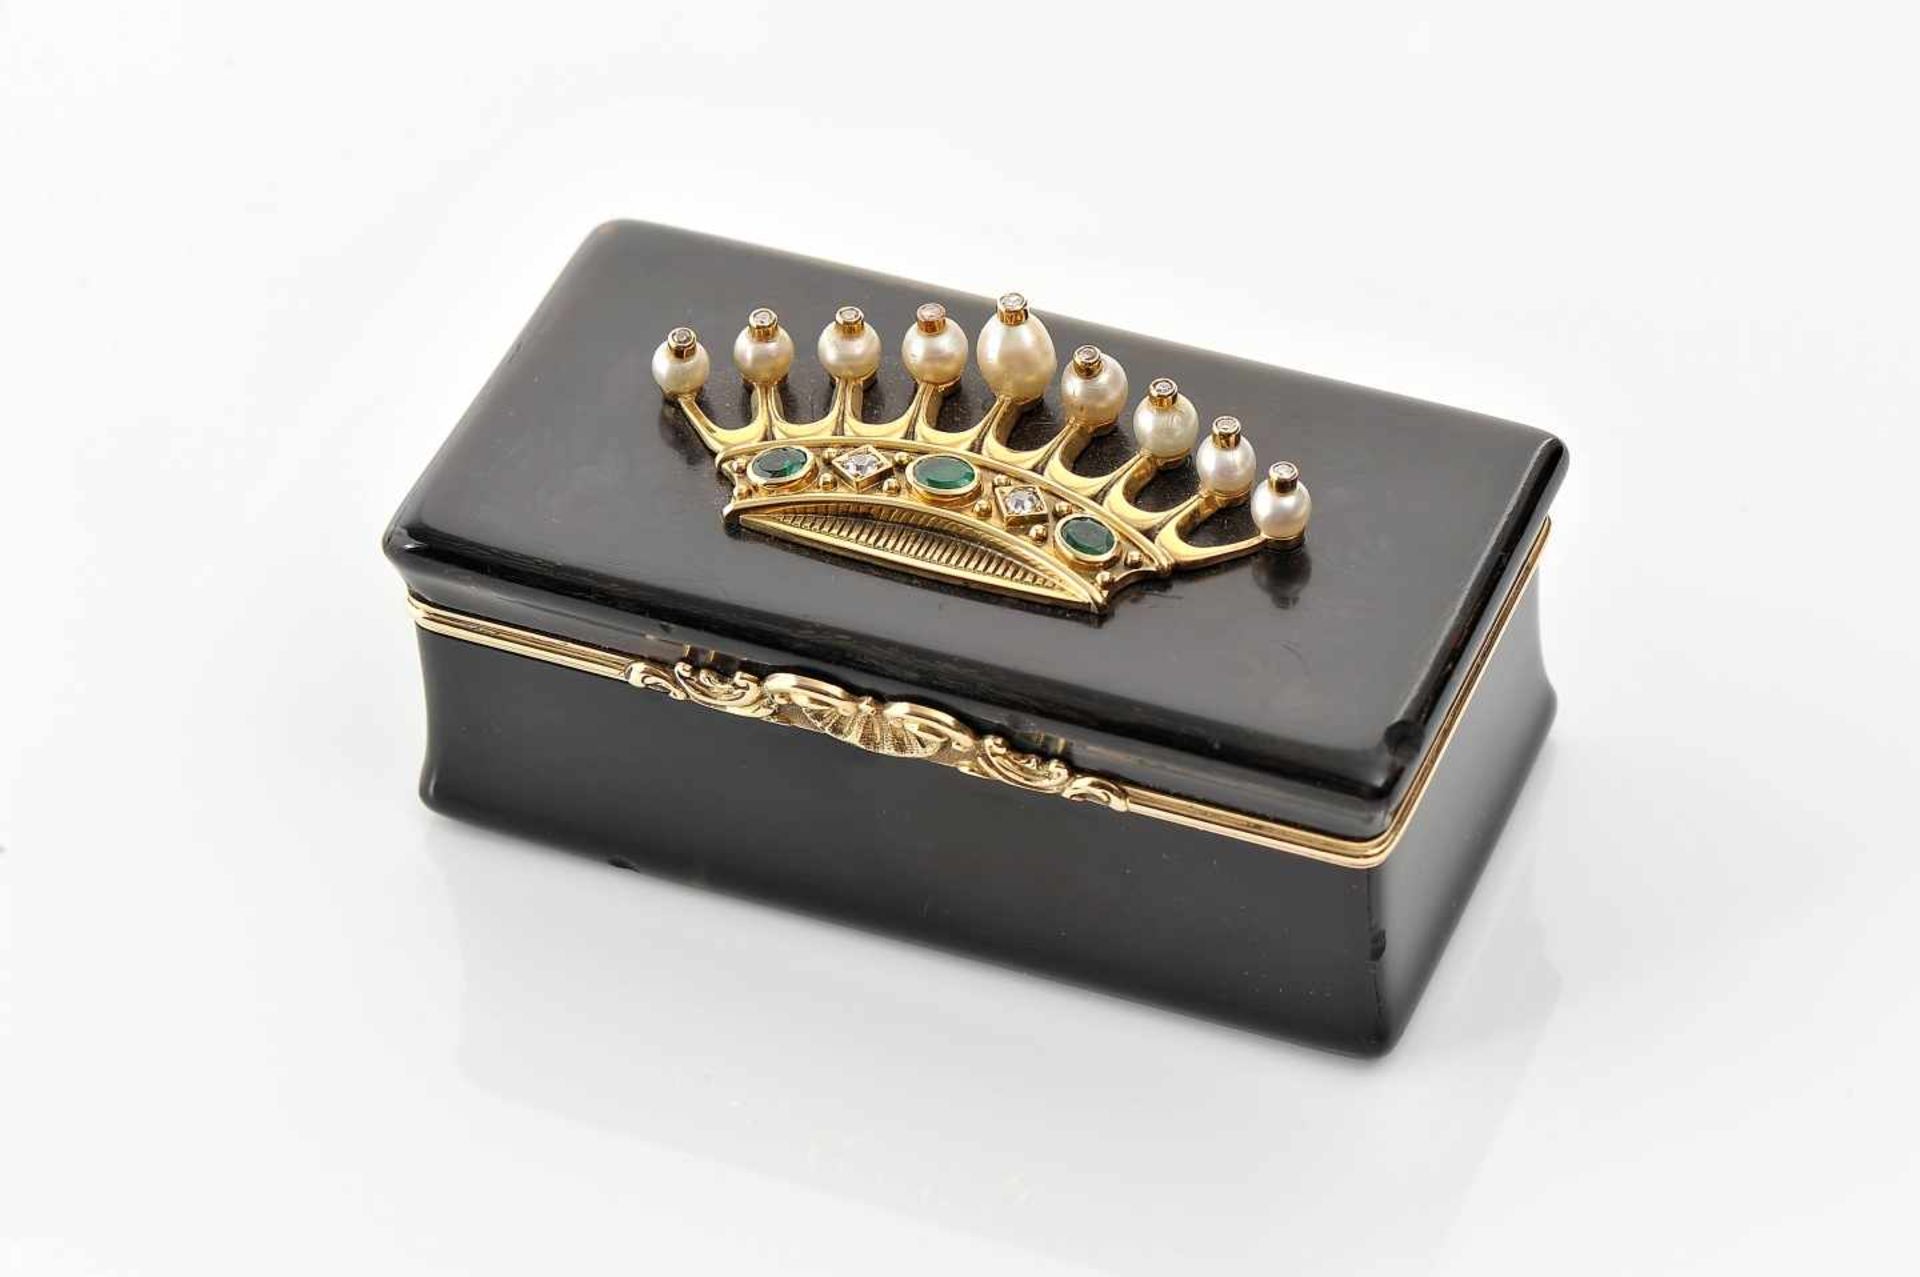 A SnuffboxA Snuffbox, tortoishell coated gold, cover with gold application "Count coronet", set with